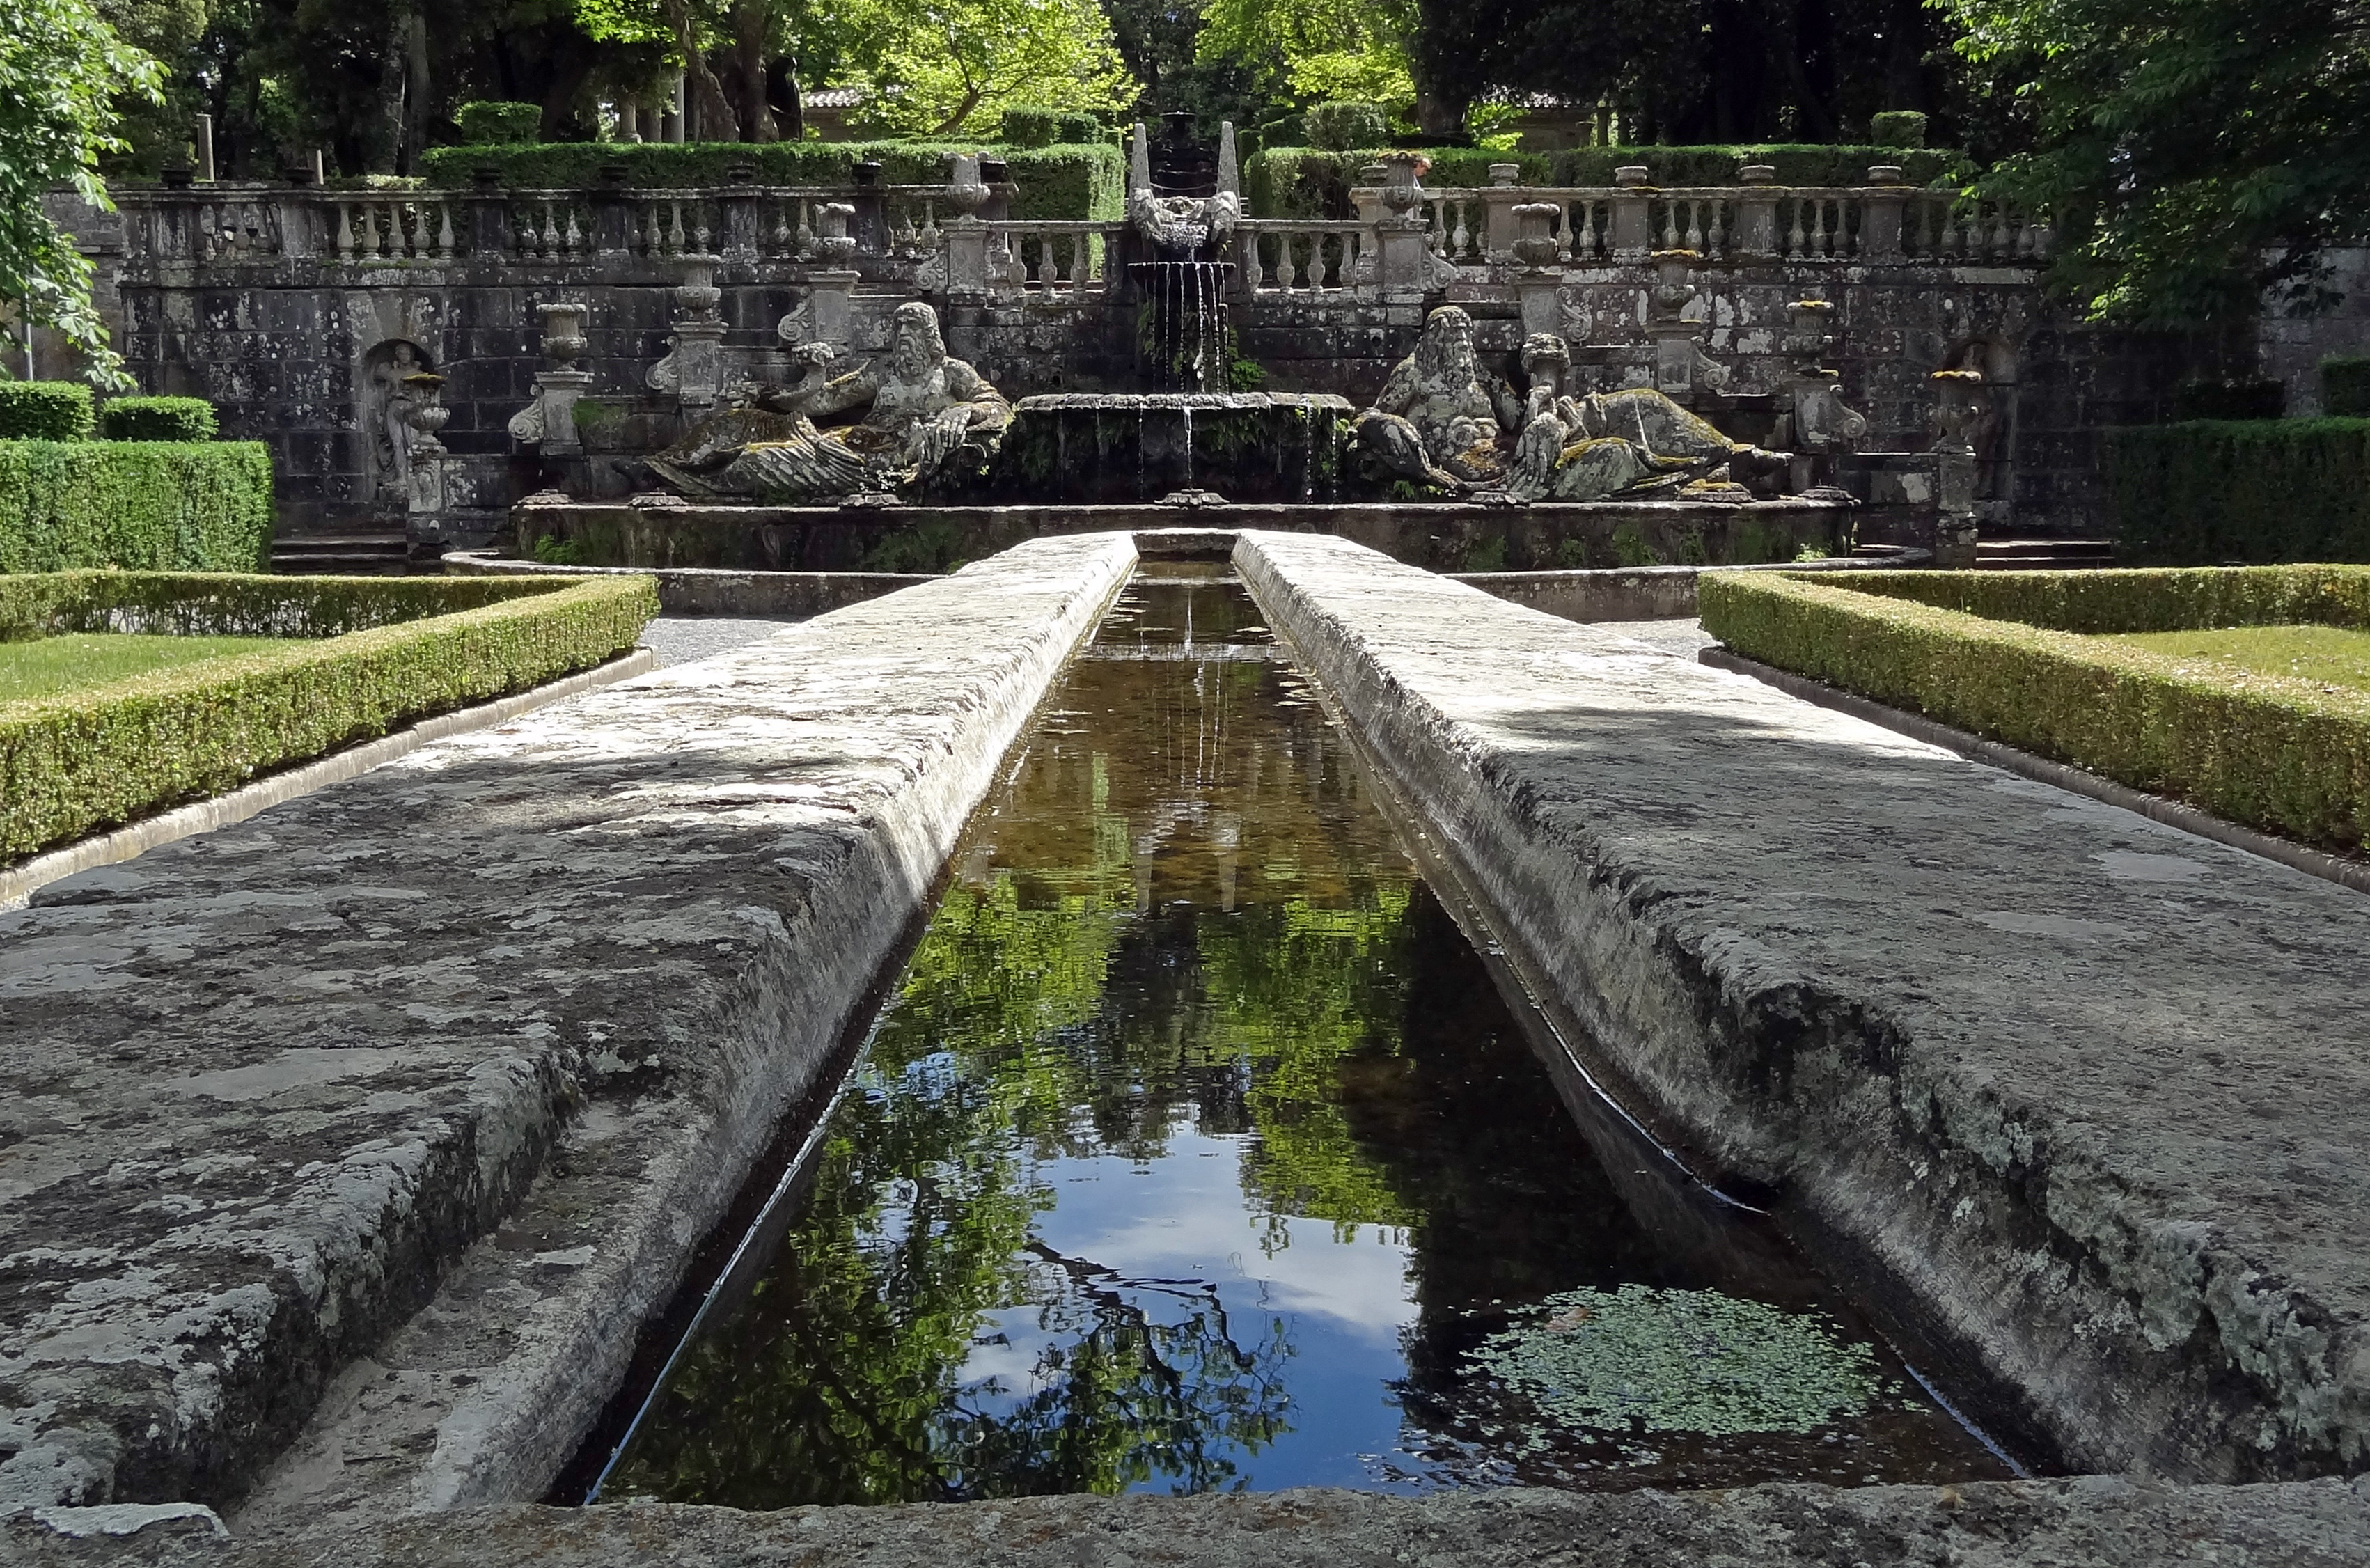 Image of central water feature at Villa Lante.